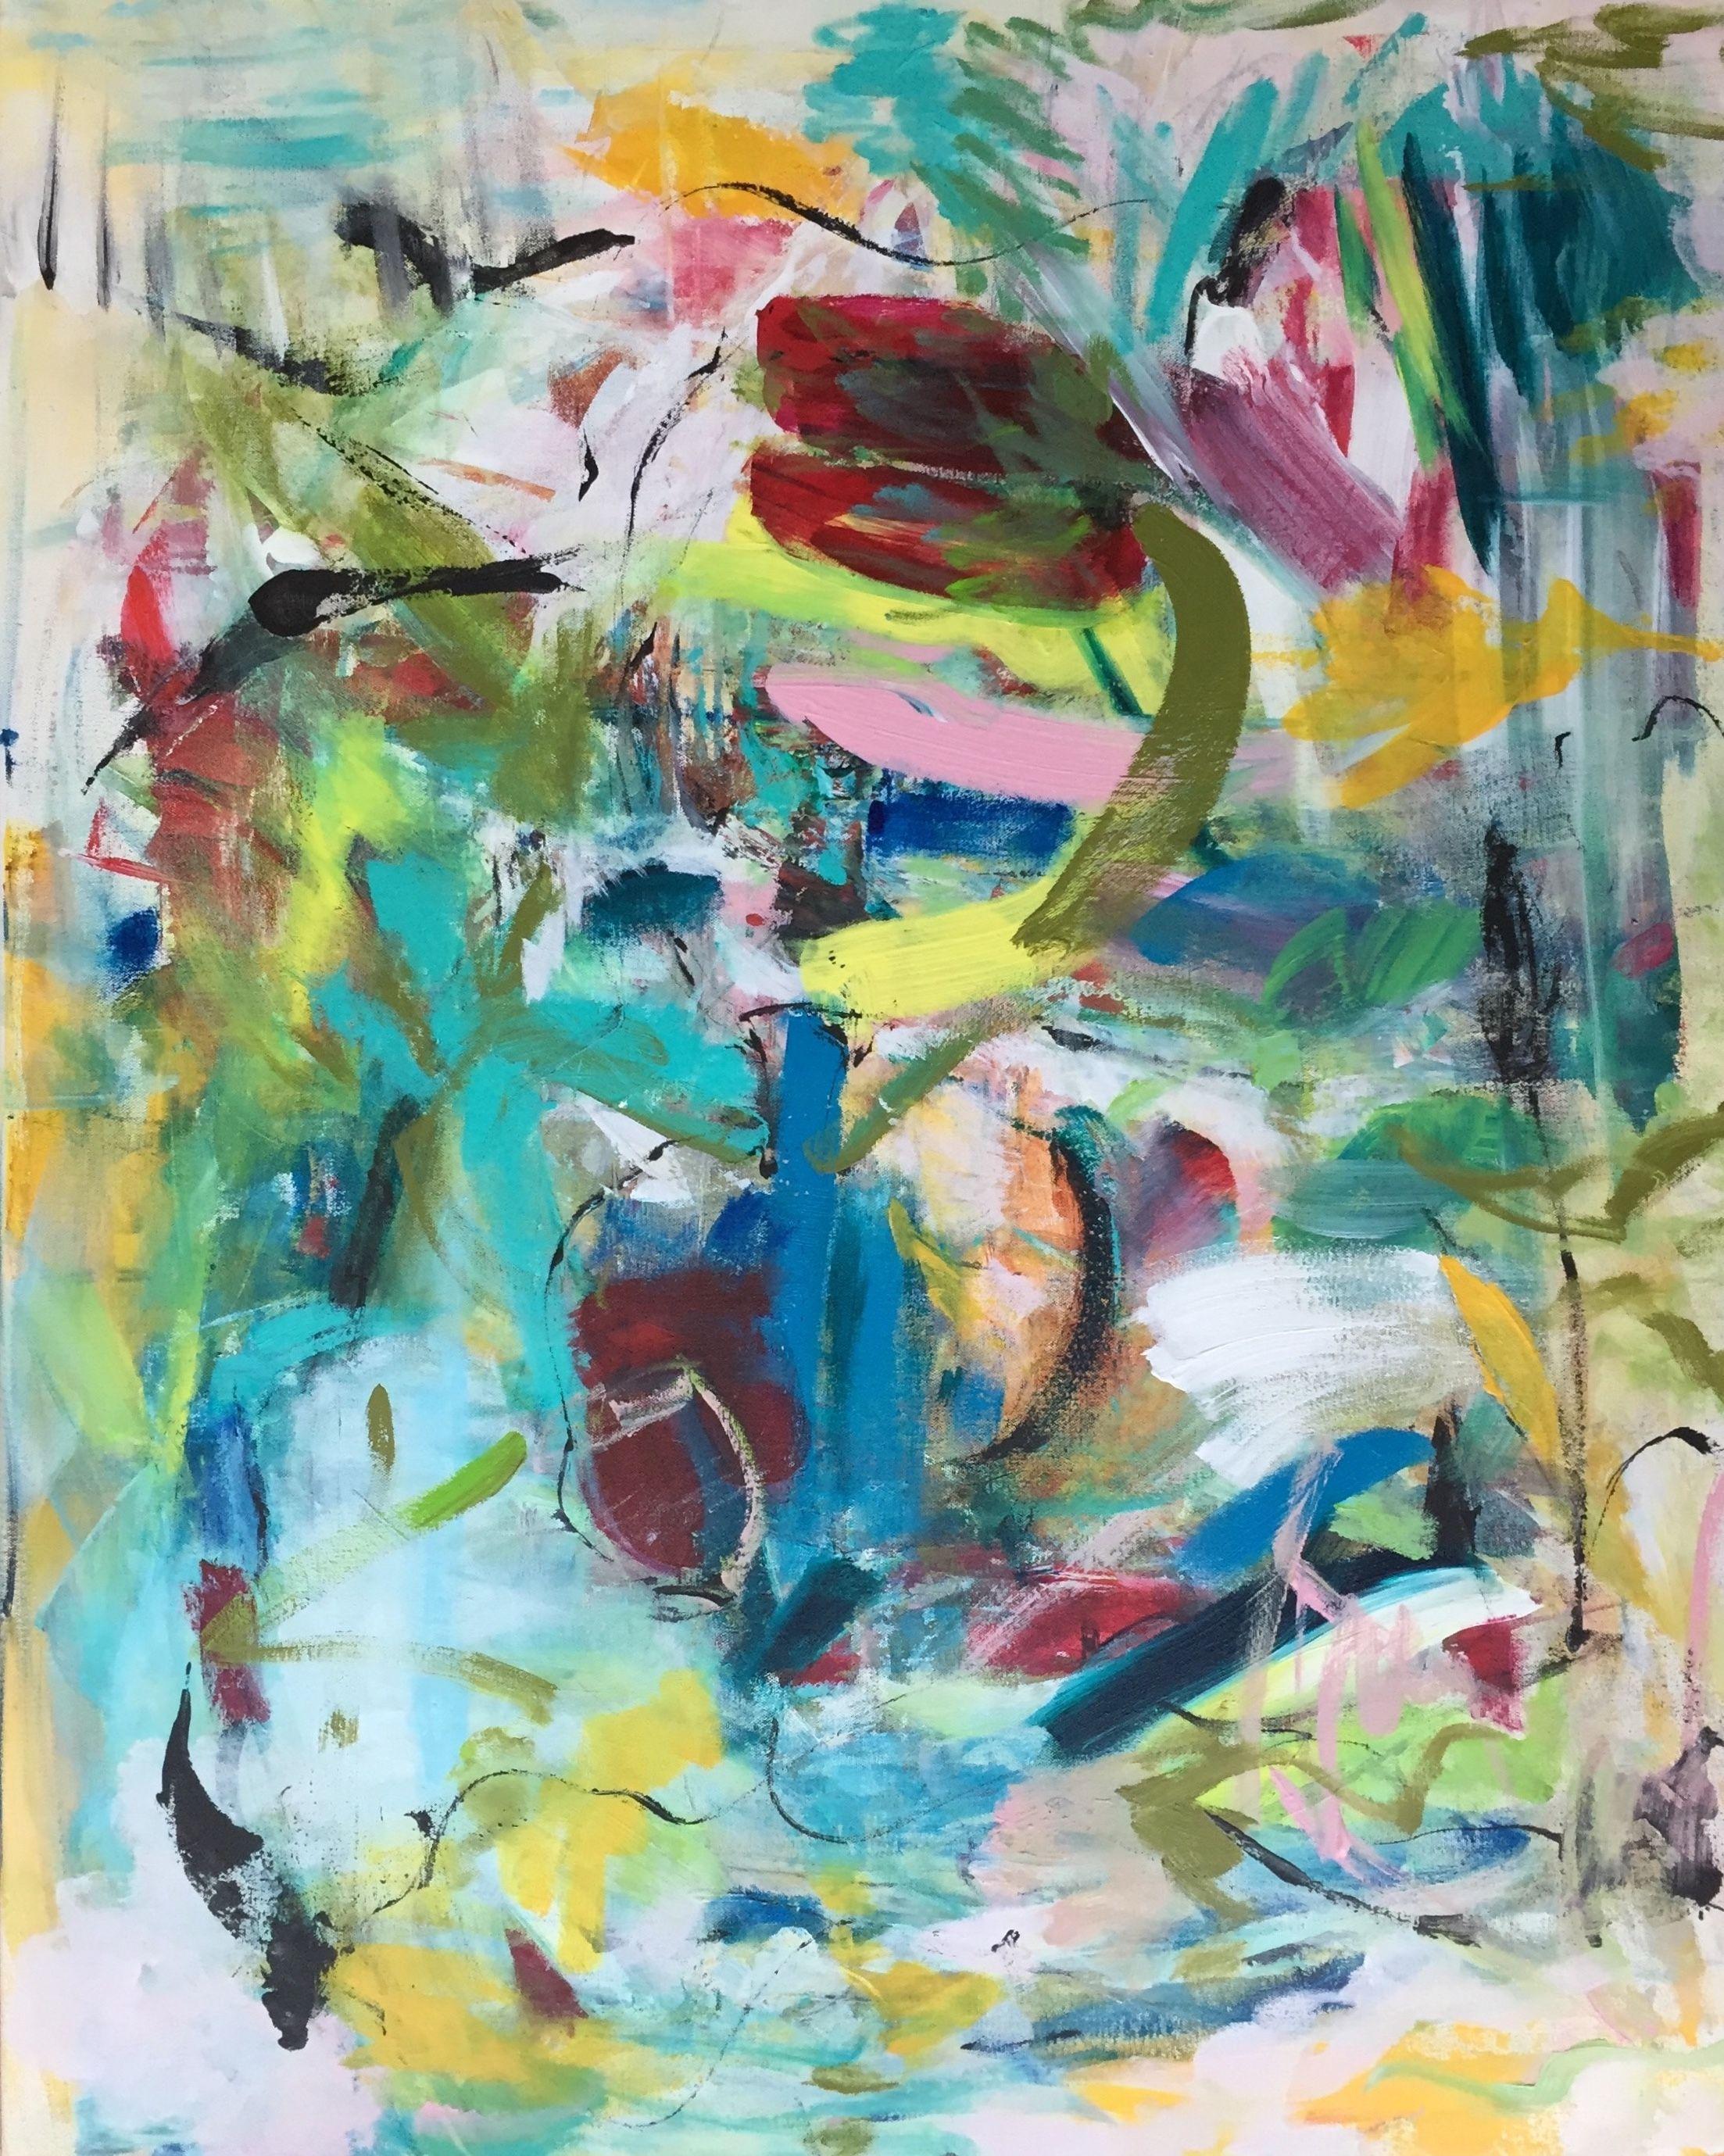 Abstract Painting Christel Haag - Keep Your Memories, Peinture, Acrylique sur Toile